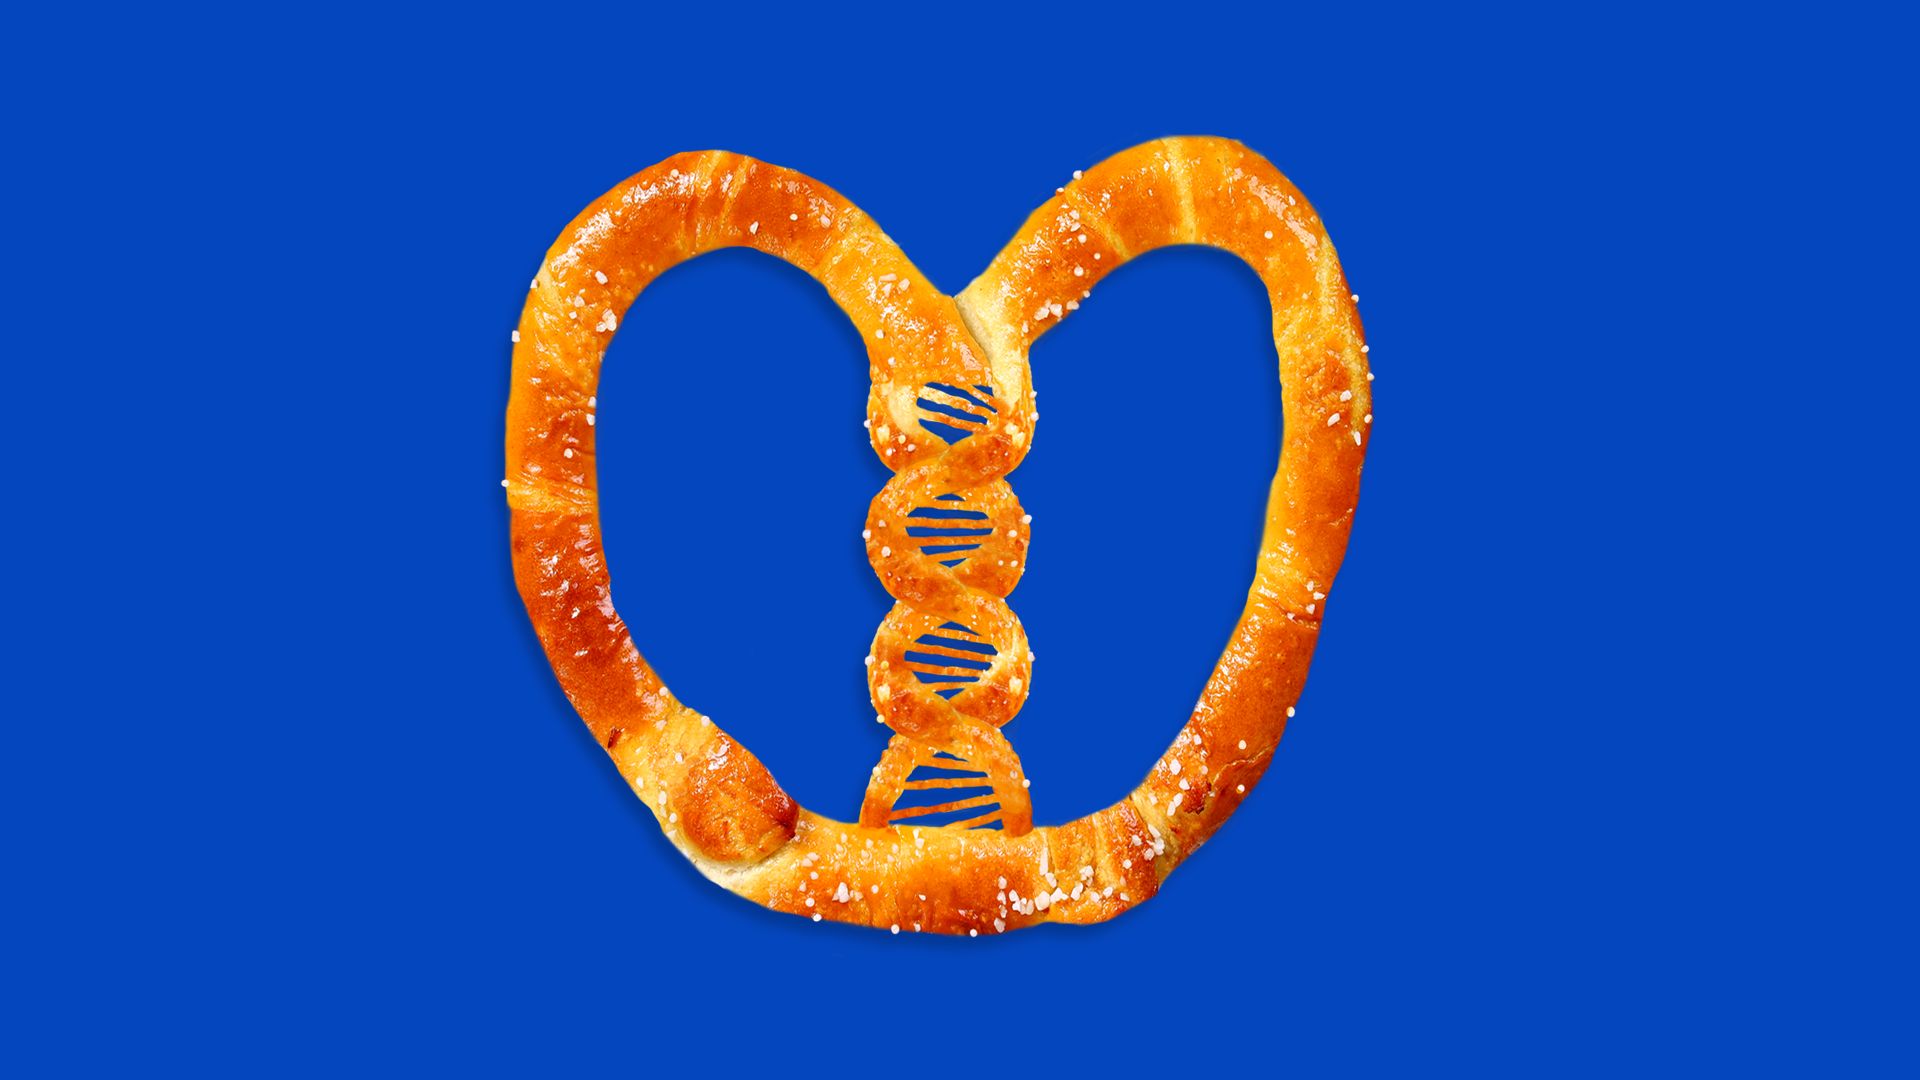 Wheat pretzel twisted with genetic code running down the middle twist